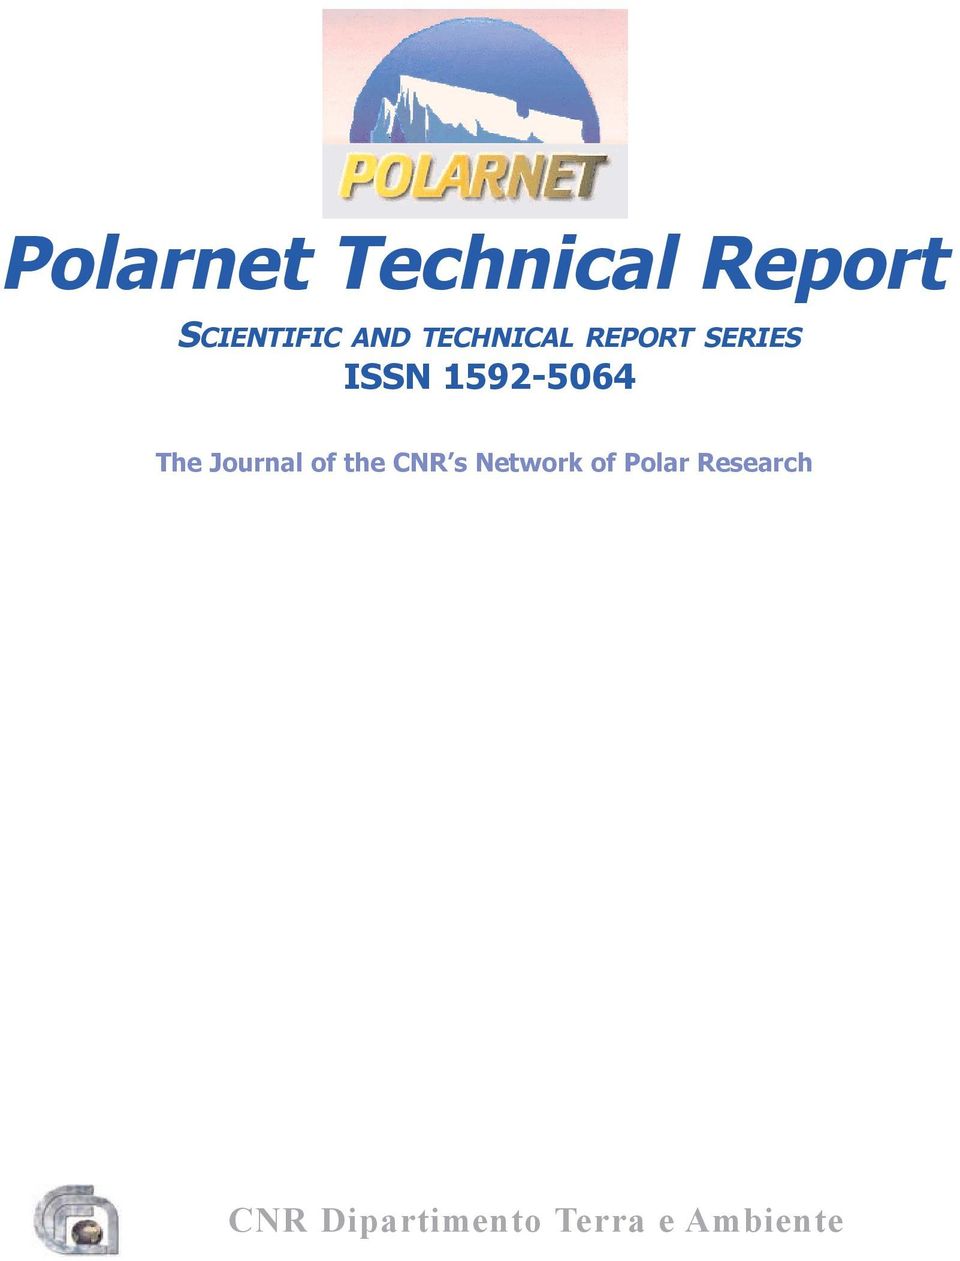 The Journal of the CNR s Network of